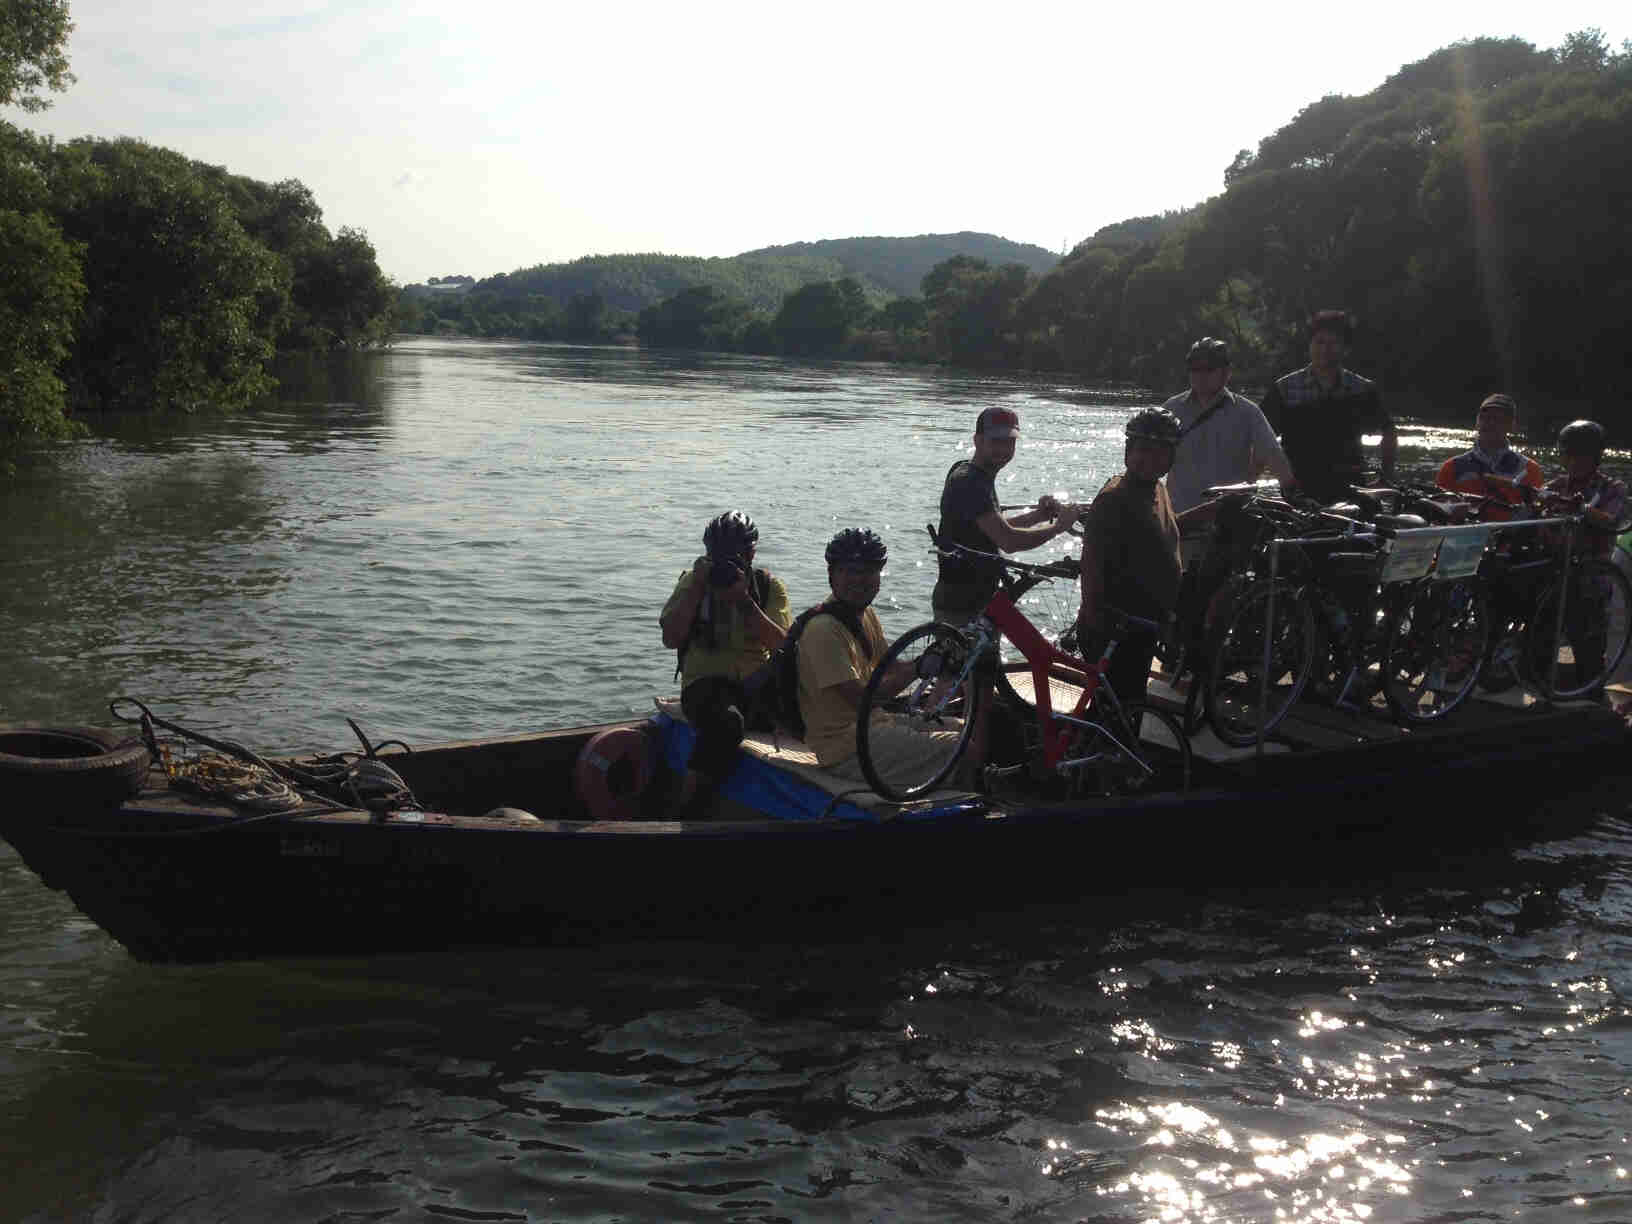 Right side view of a small ferry boat, crossing a river, with people and bikes onboard